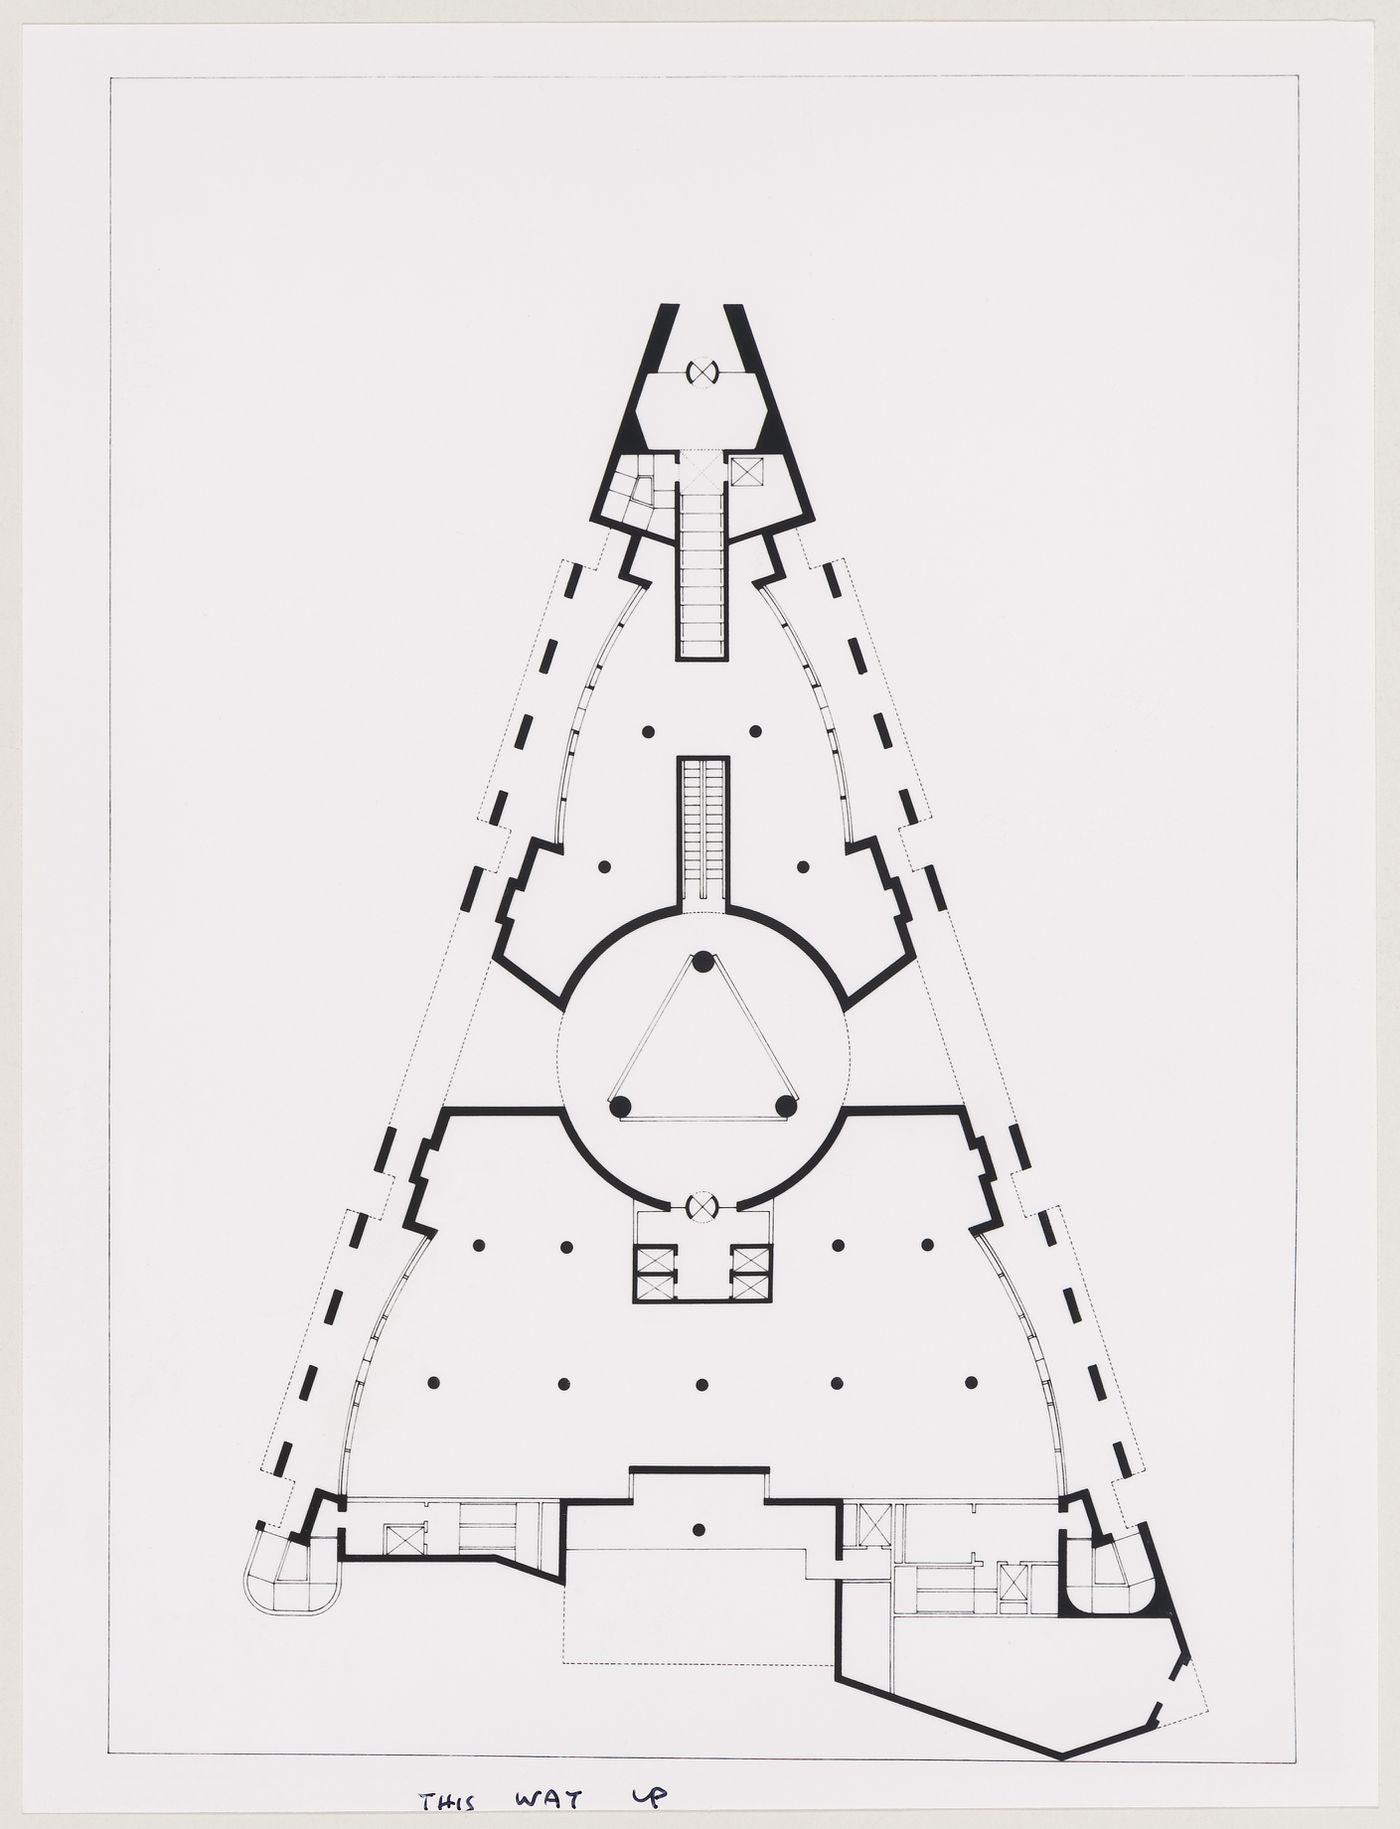 No. 1 Poultry, London, England: floor plan